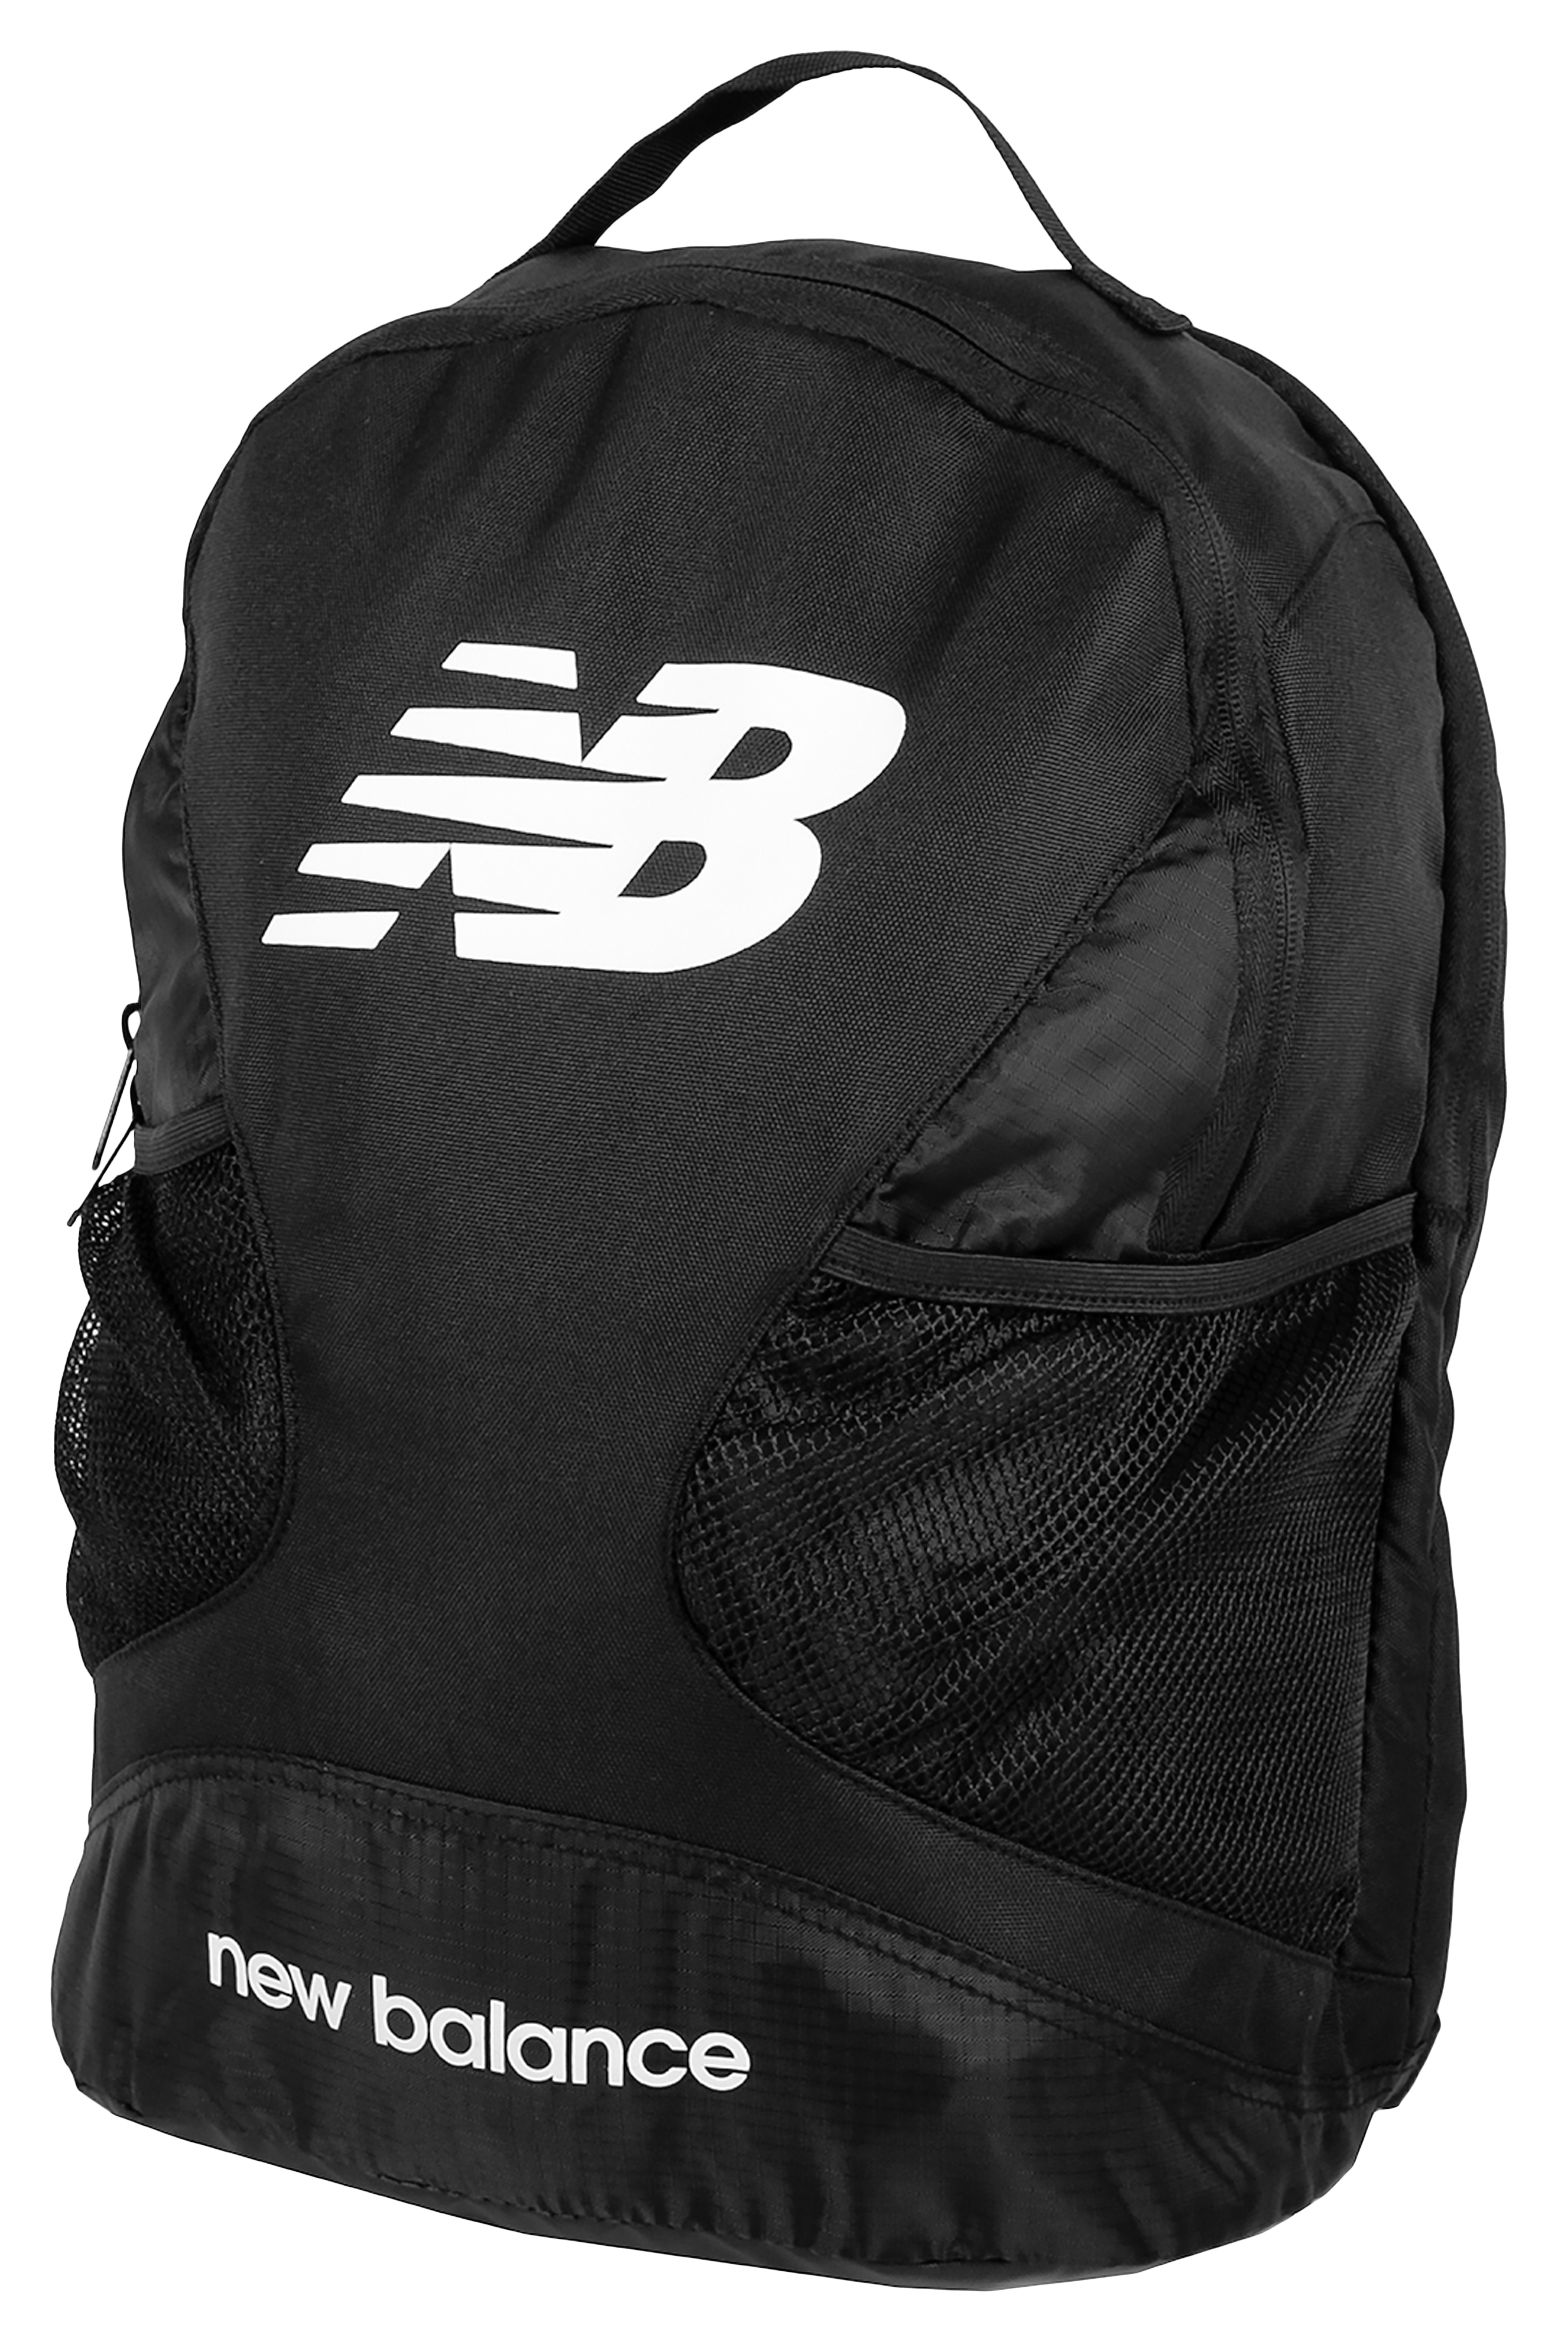 Players Backpack - New Balance